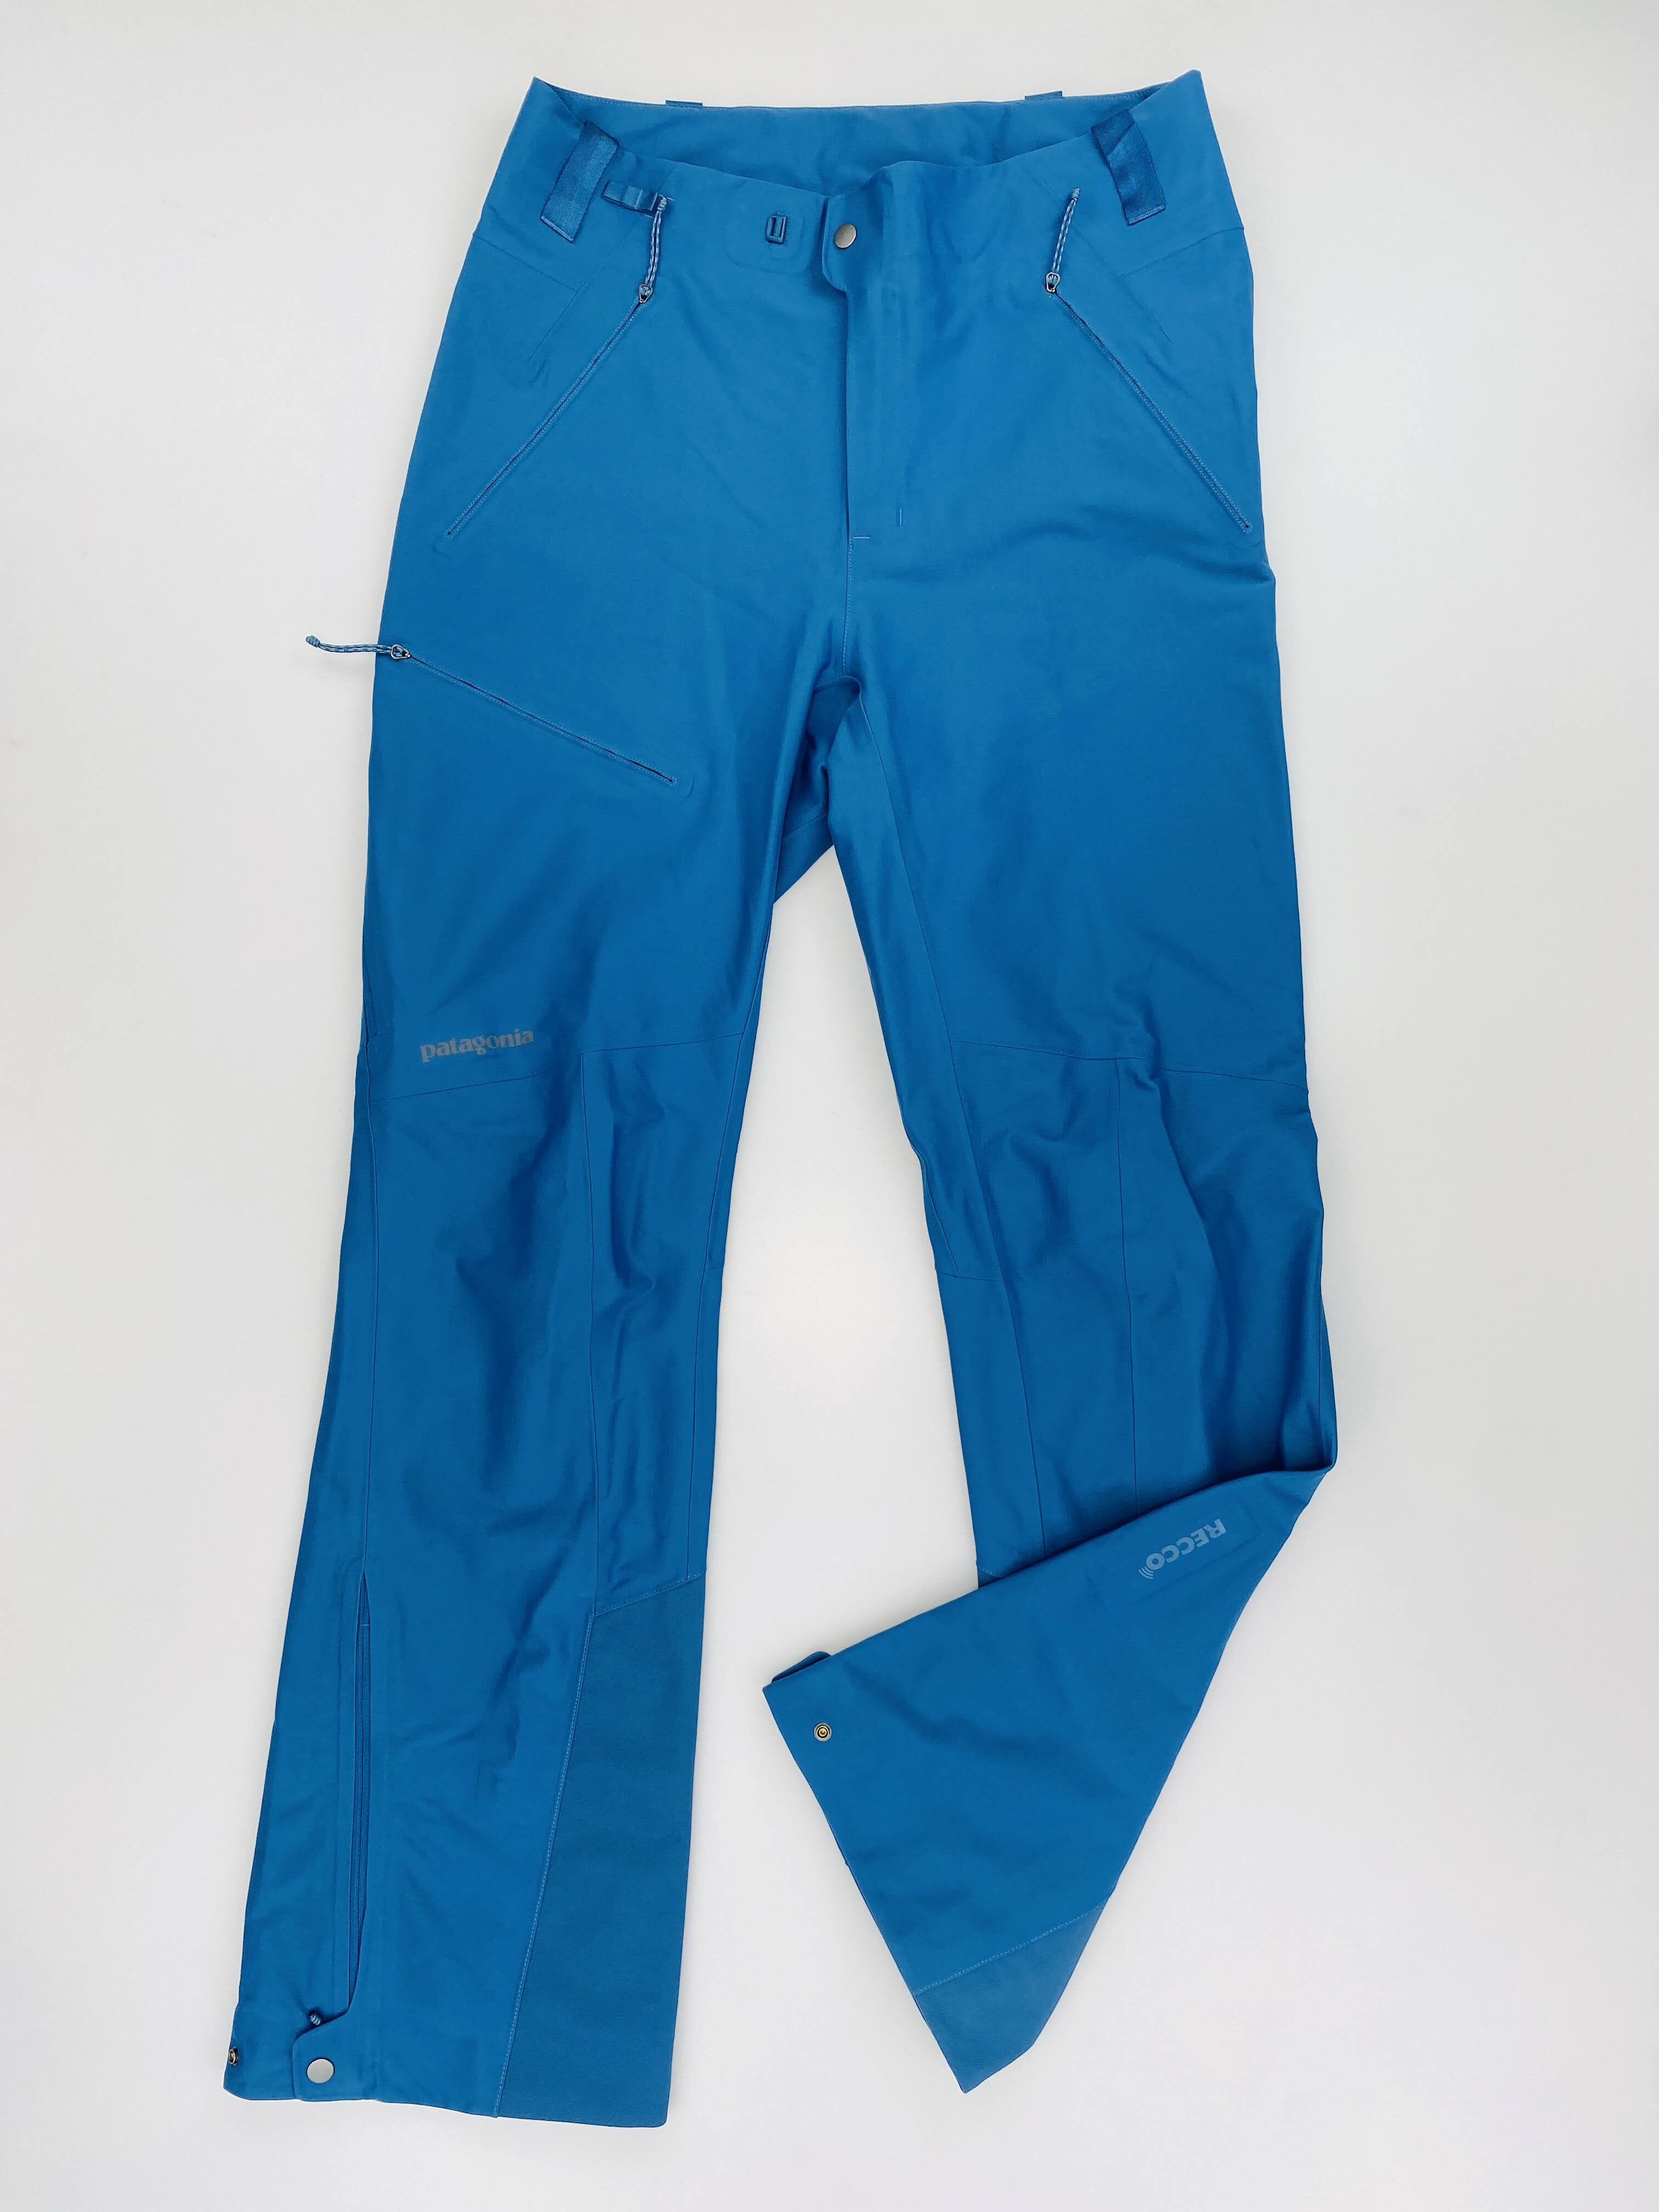 Patagonia M's Upstride Pants - Second Hand Walking trousers - Men's ...